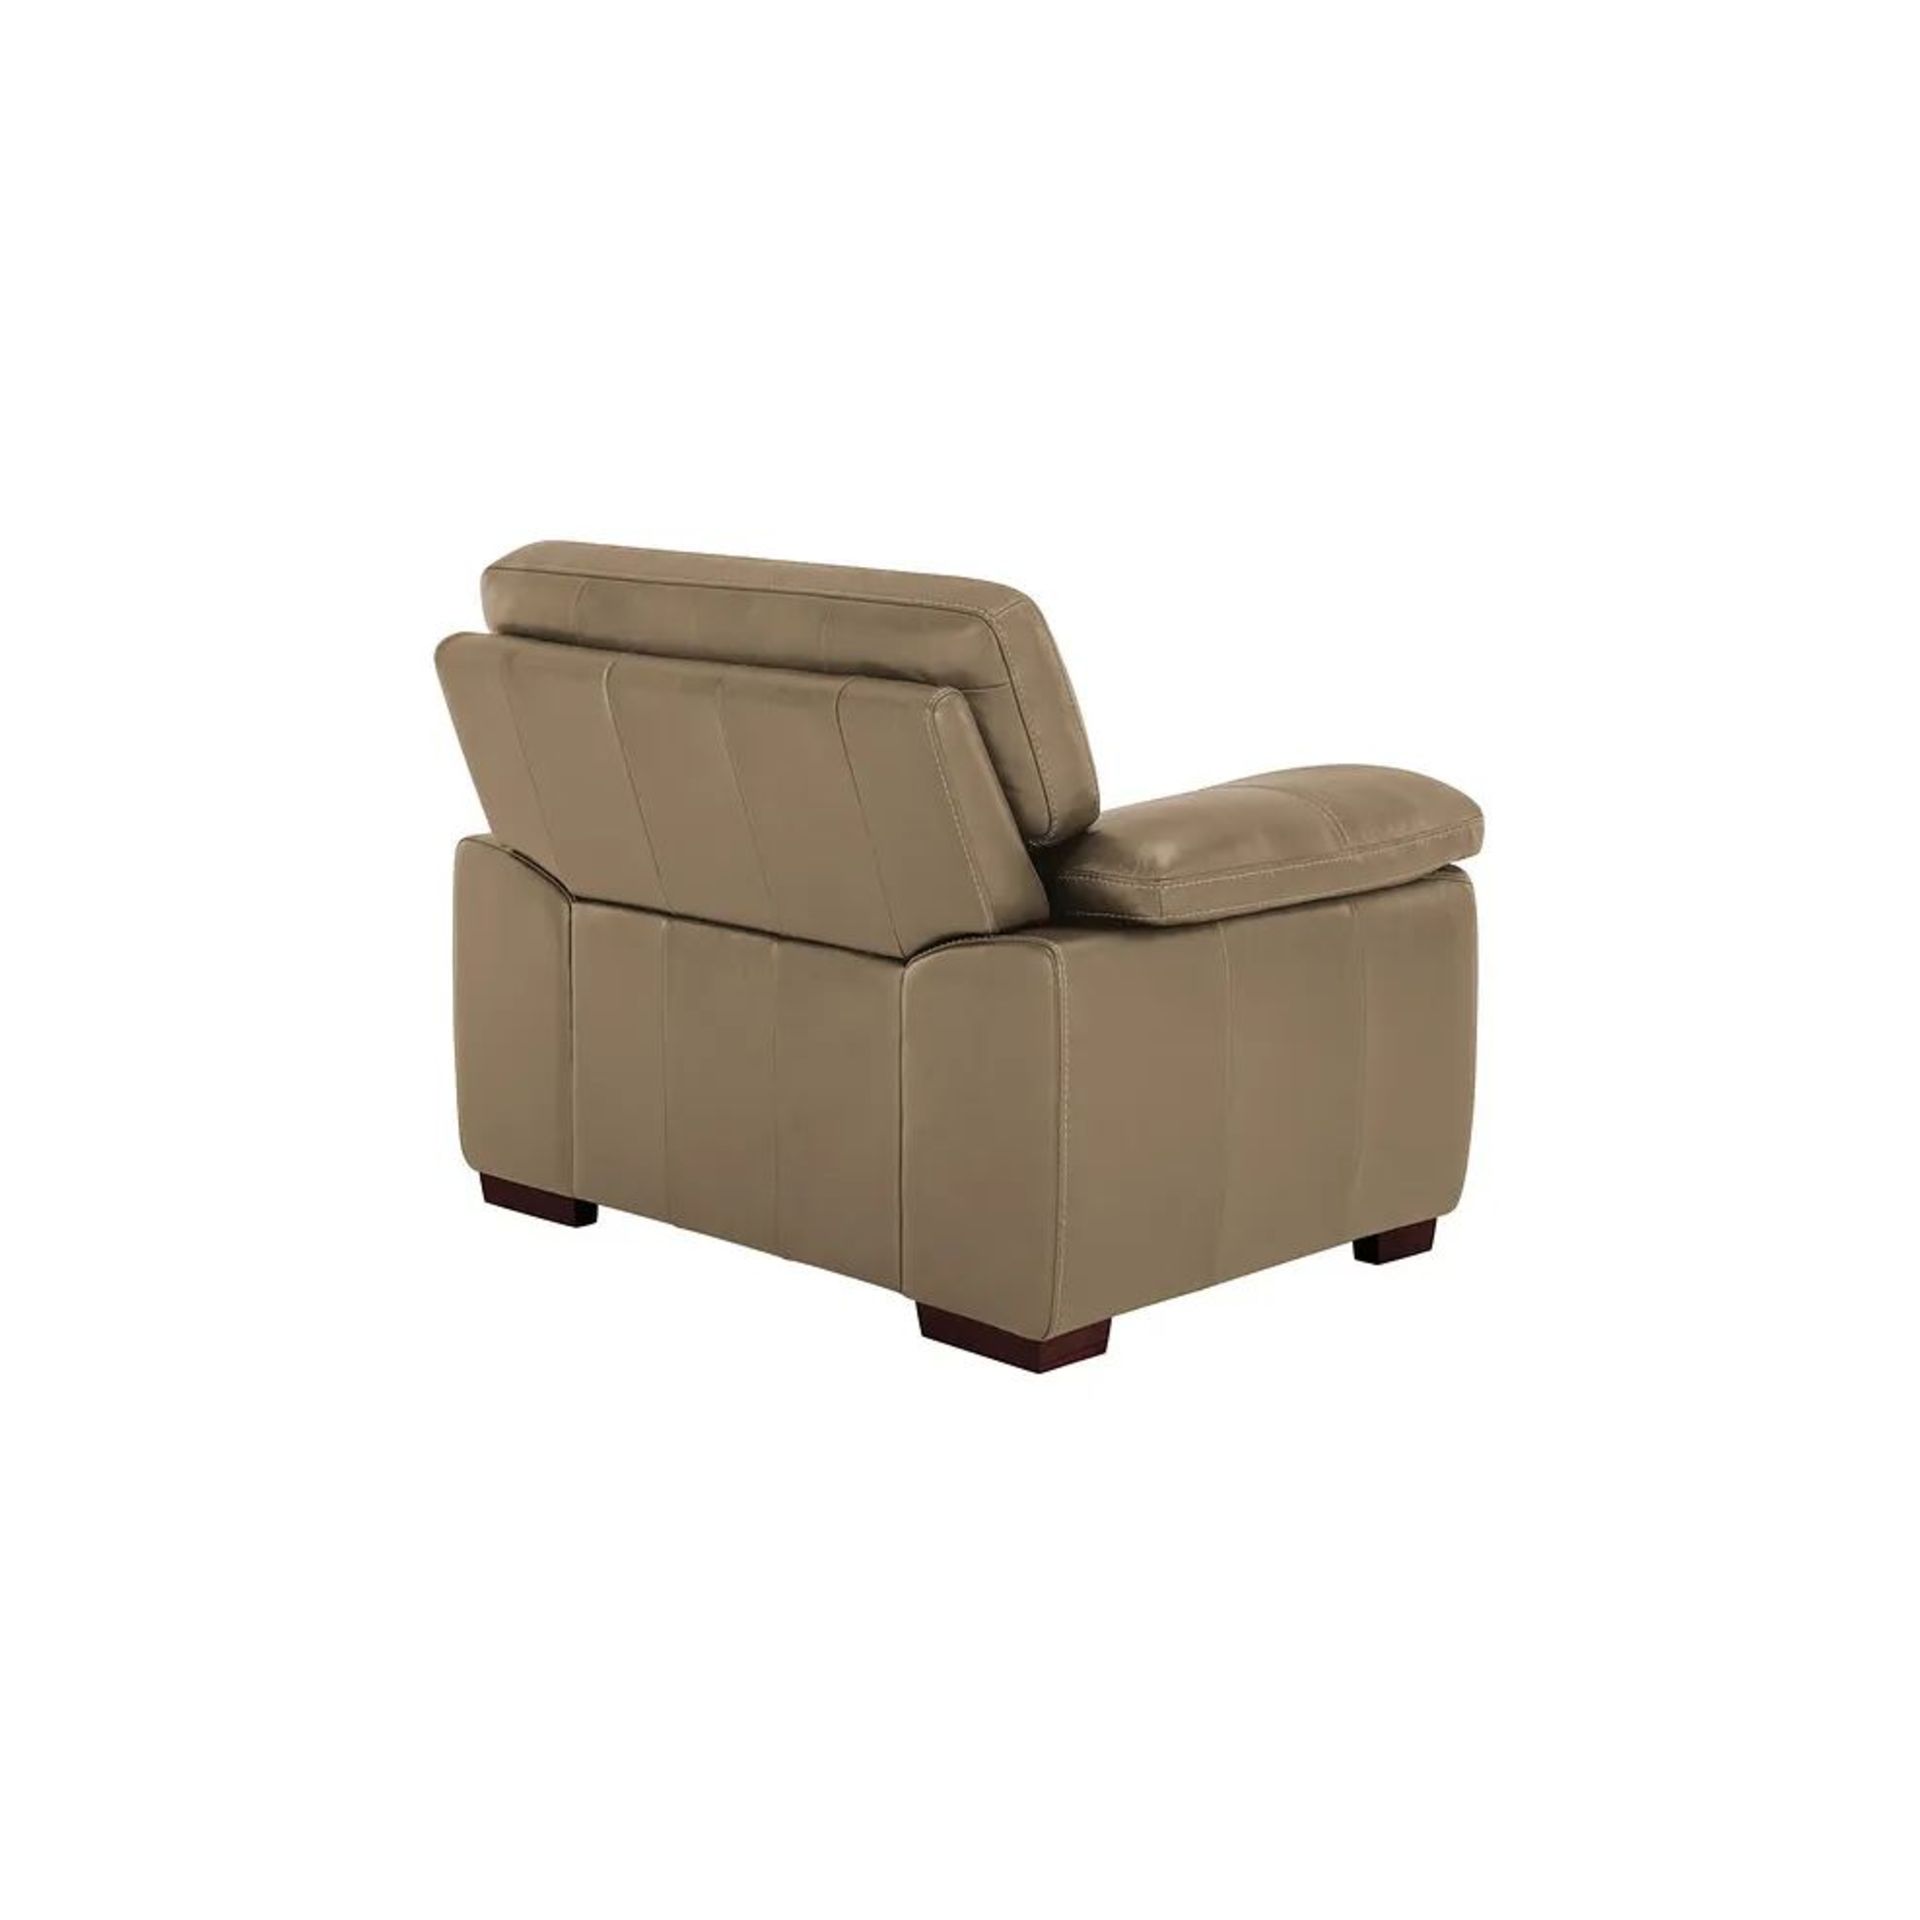 BRAND NEW ARLINGTON Armchair - BEIGE LEATHER. RRP £1099. Create a traditional and homely feel in - Image 3 of 9